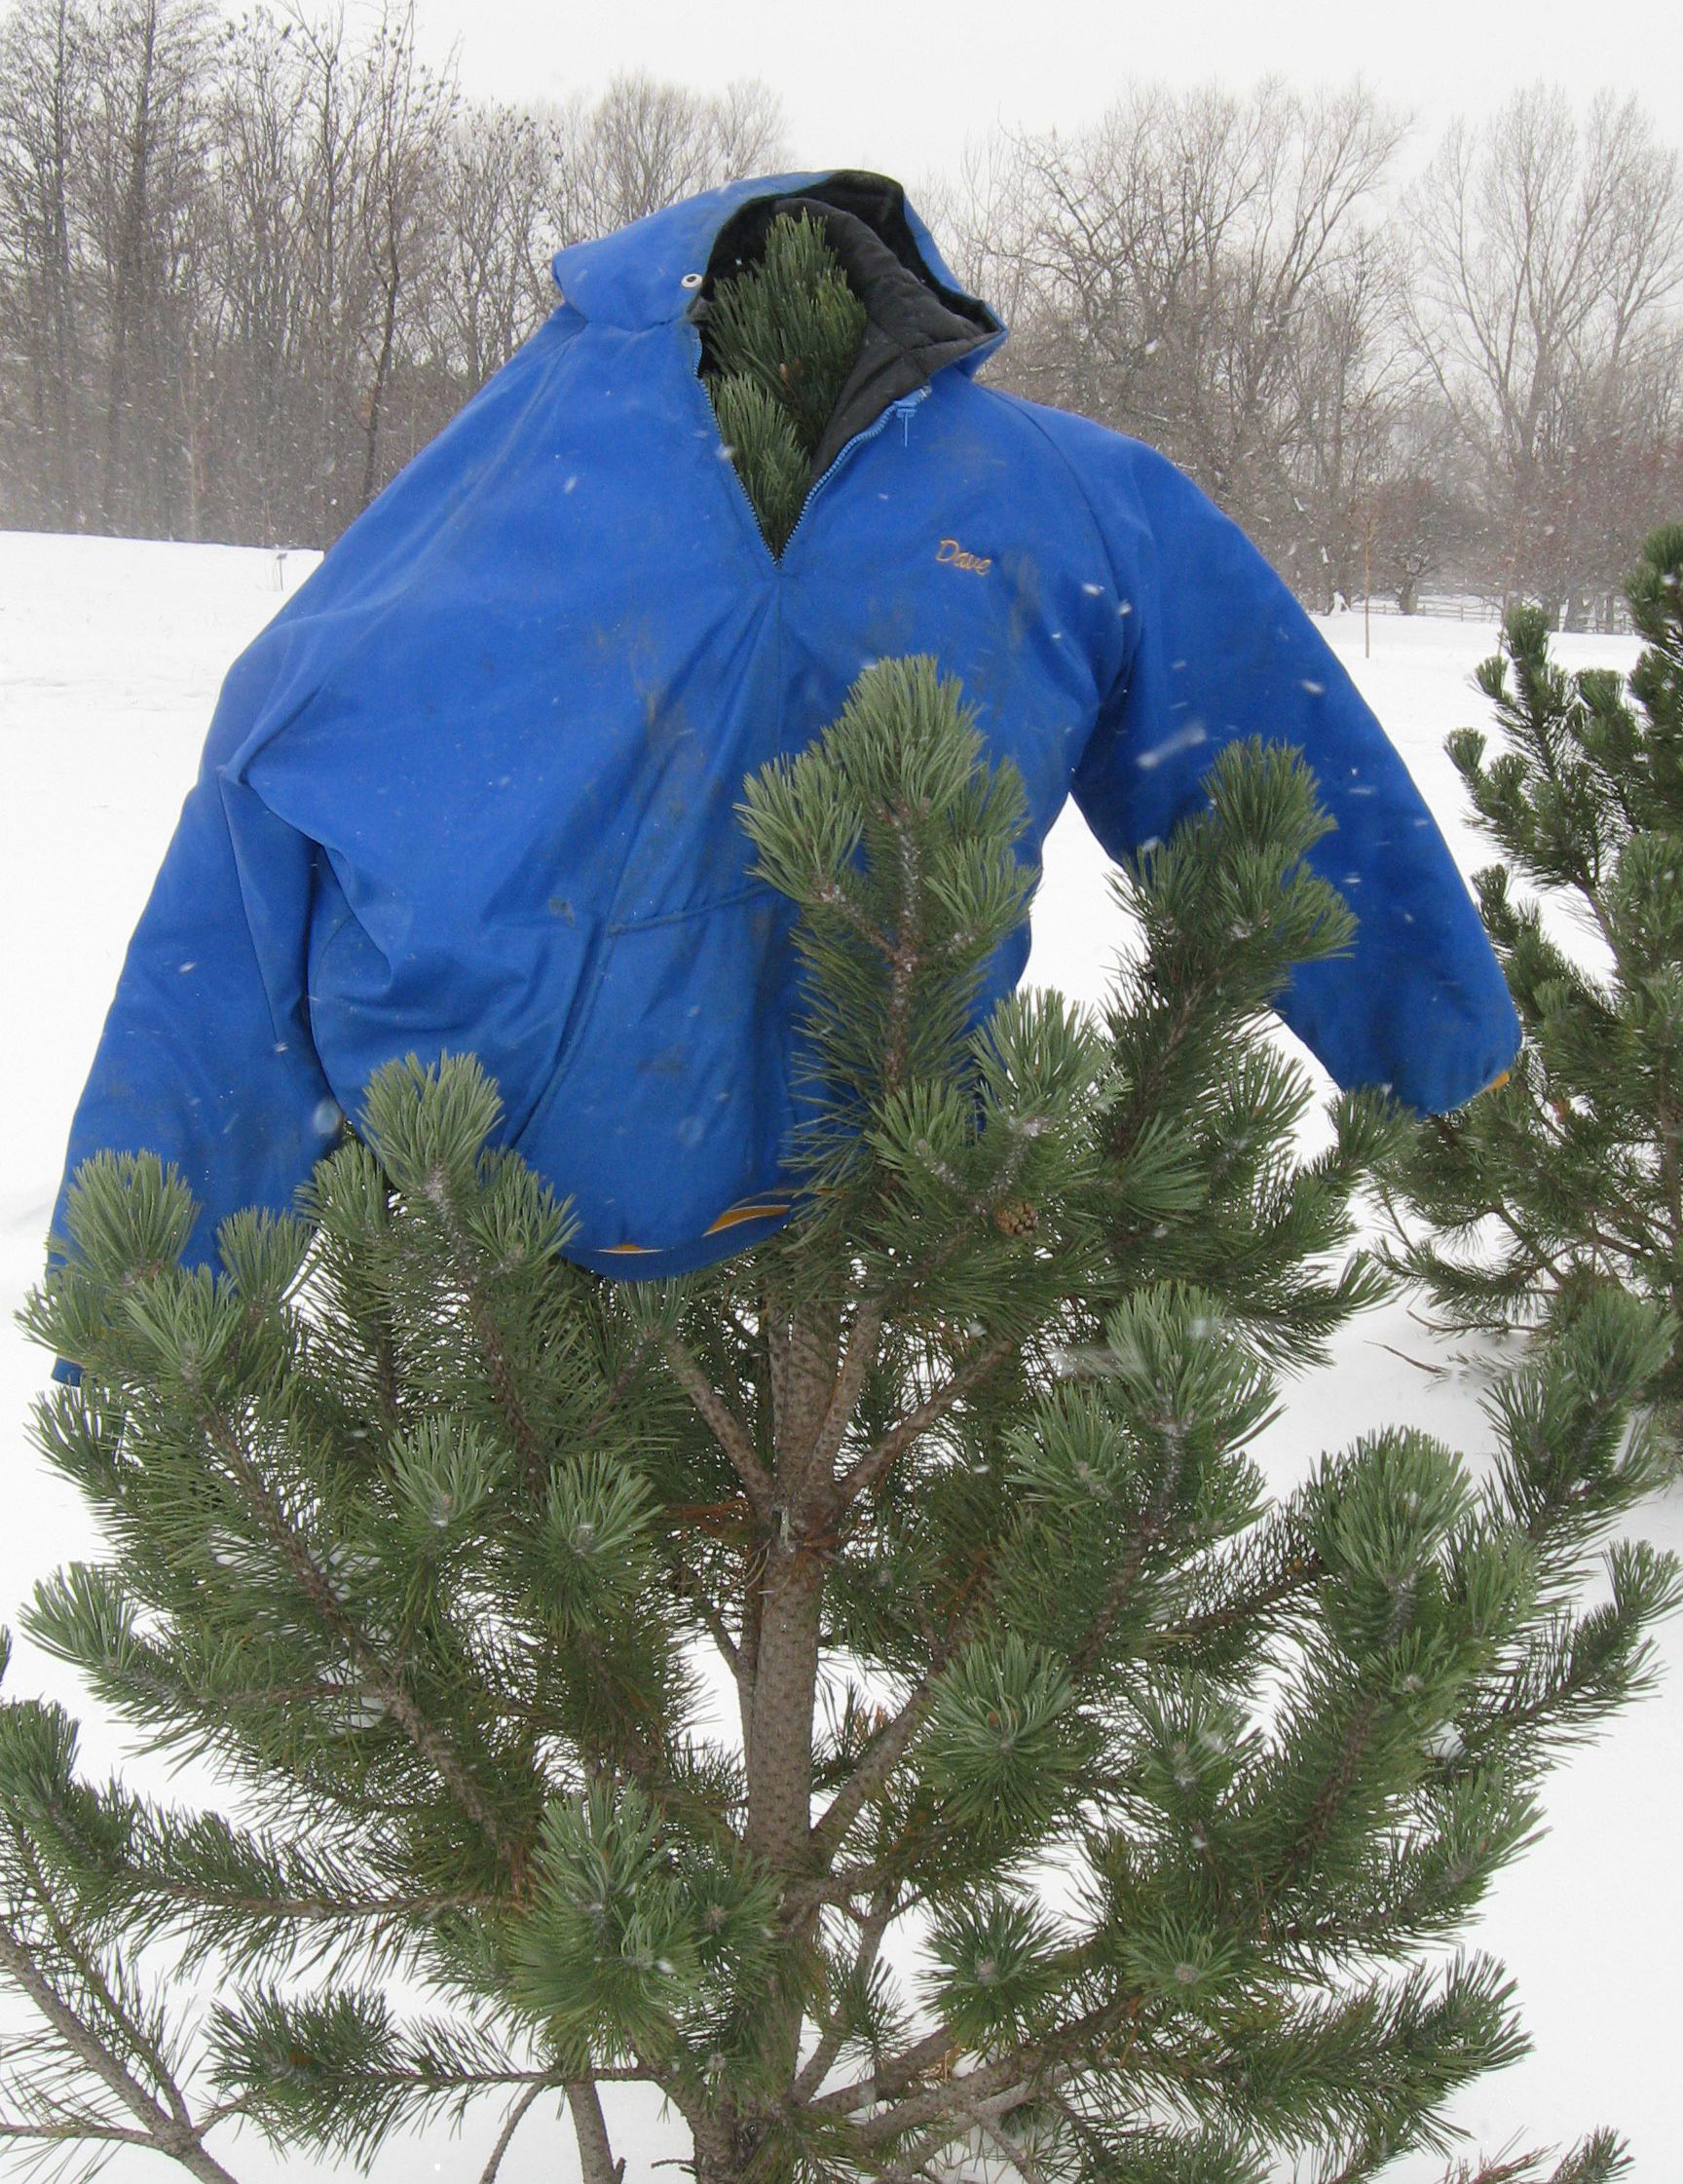 A blue coat placed atop a medium-sized evergreen tree in a snowy clearing